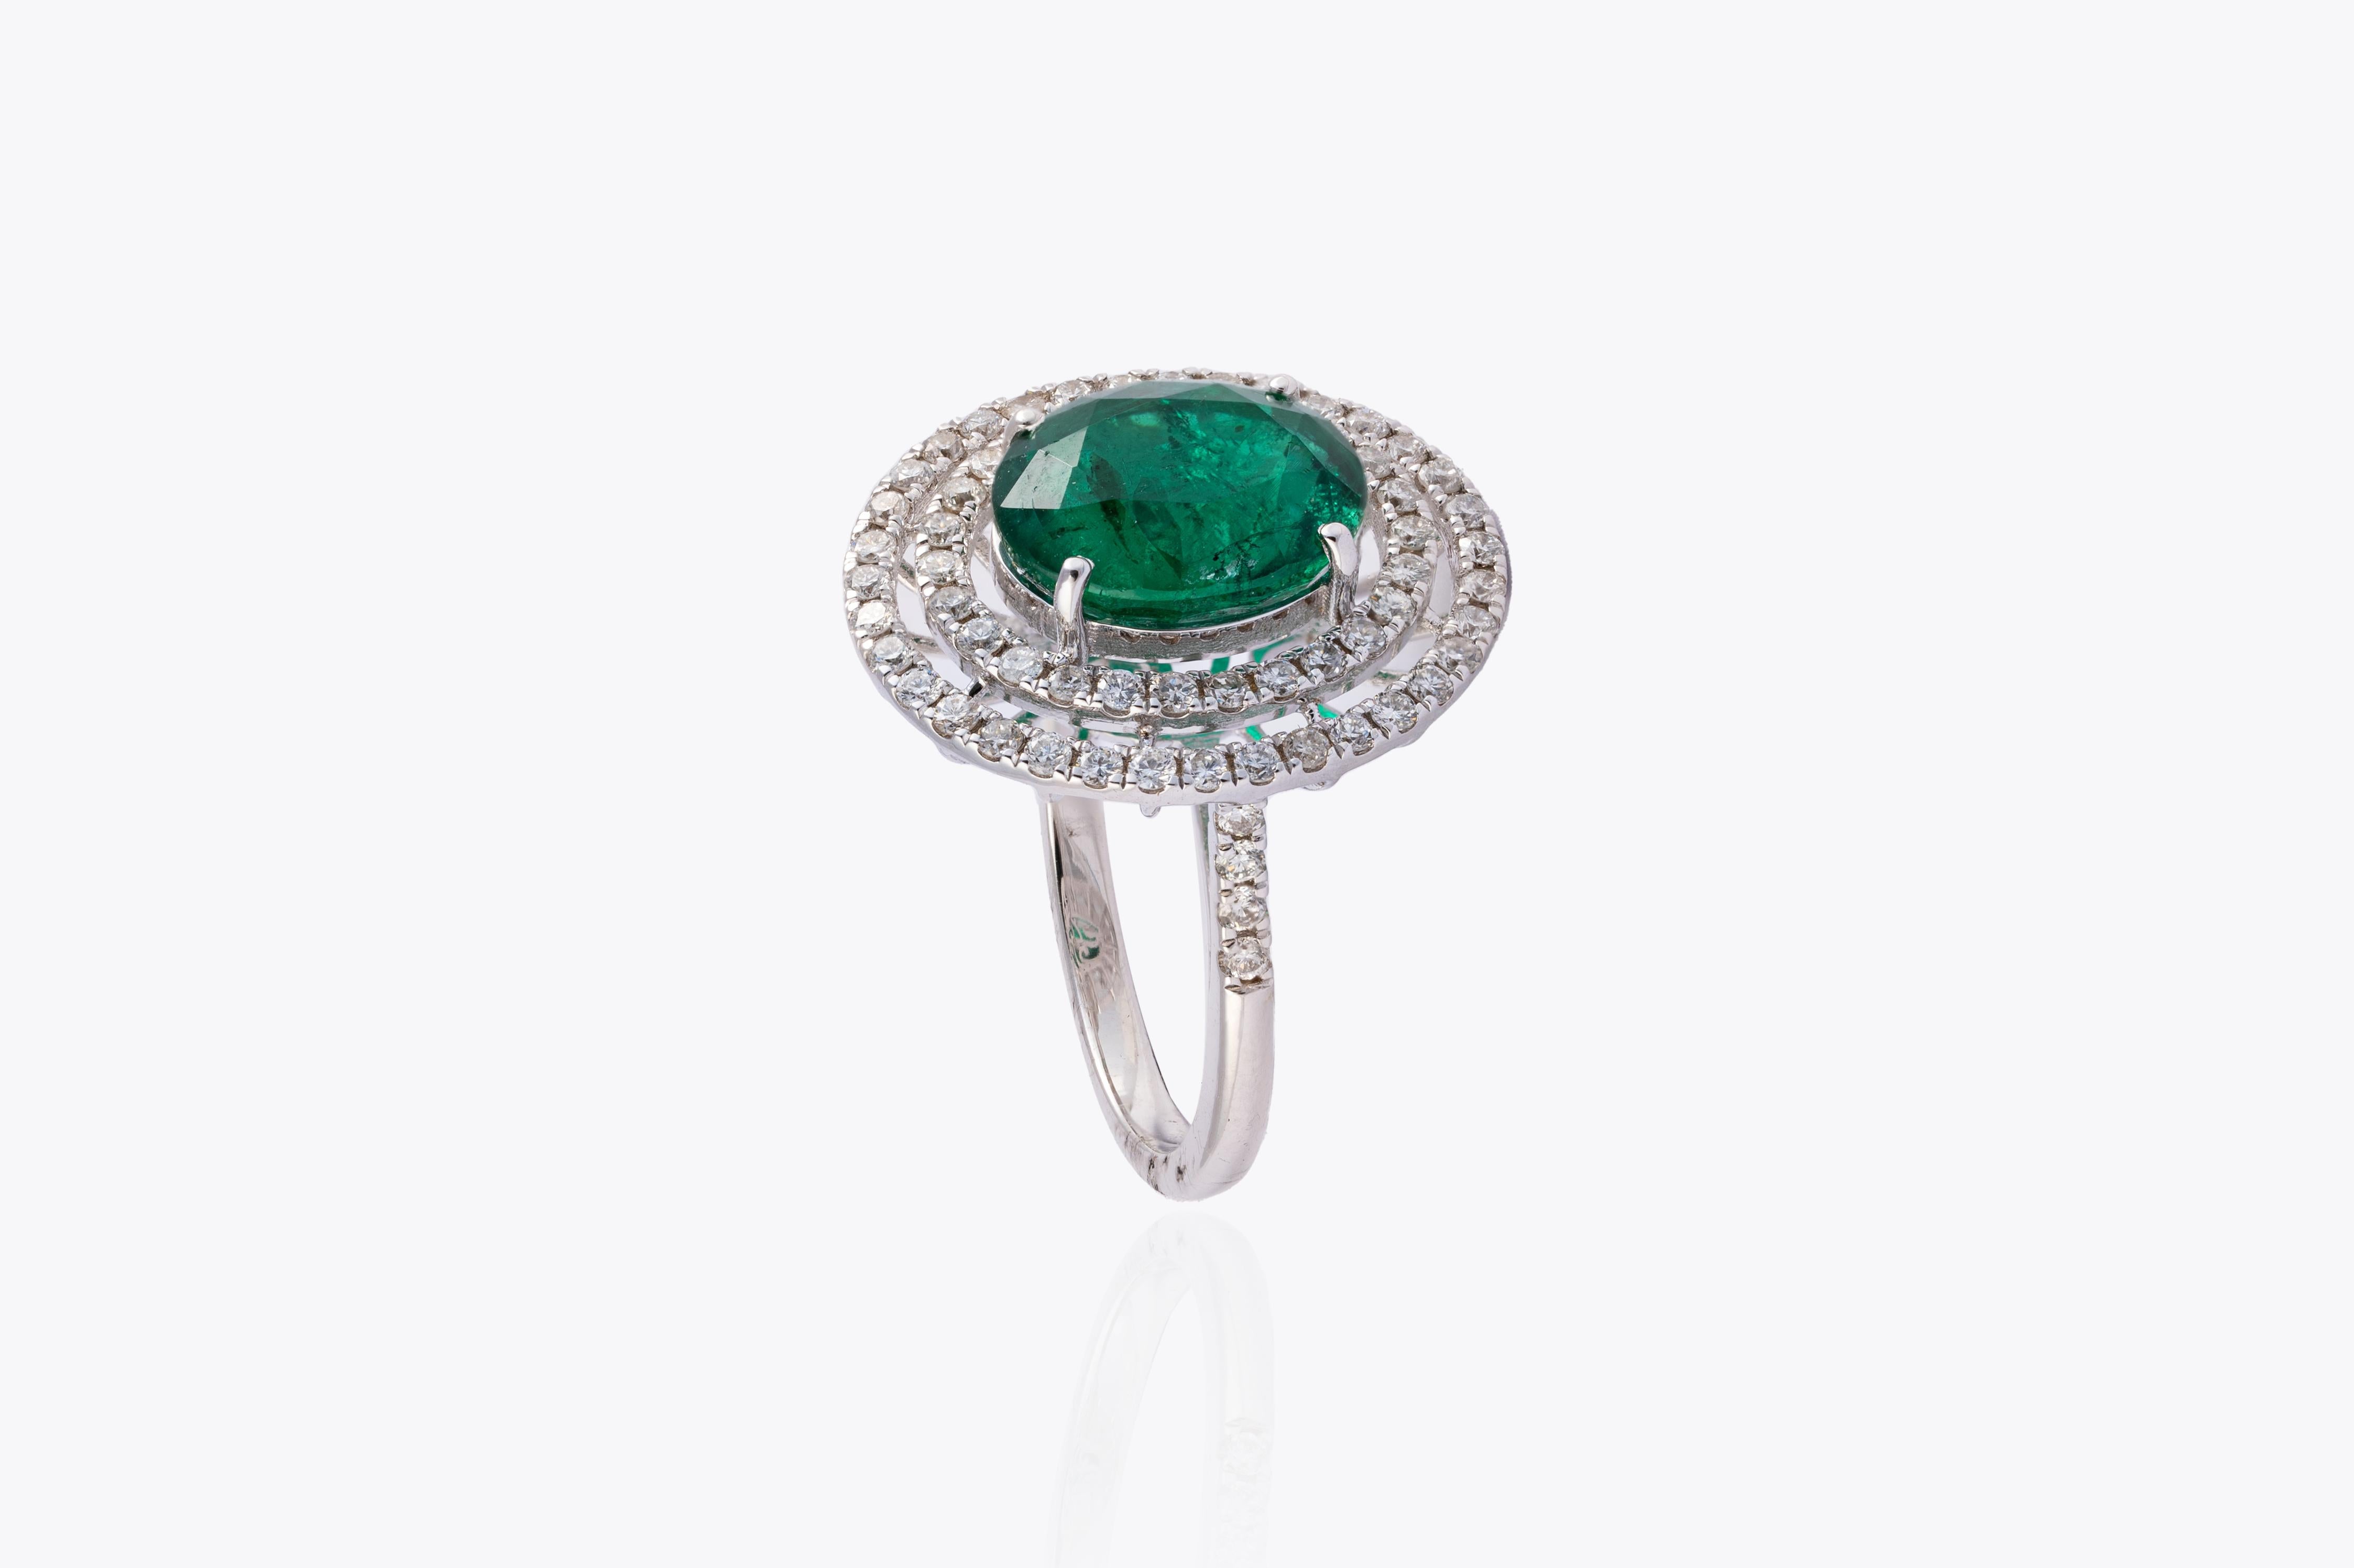 Emerald Cut Natural Zambian Emerald 5.97cts with Diamonds 2.74cts ring and 14k Gold For Sale